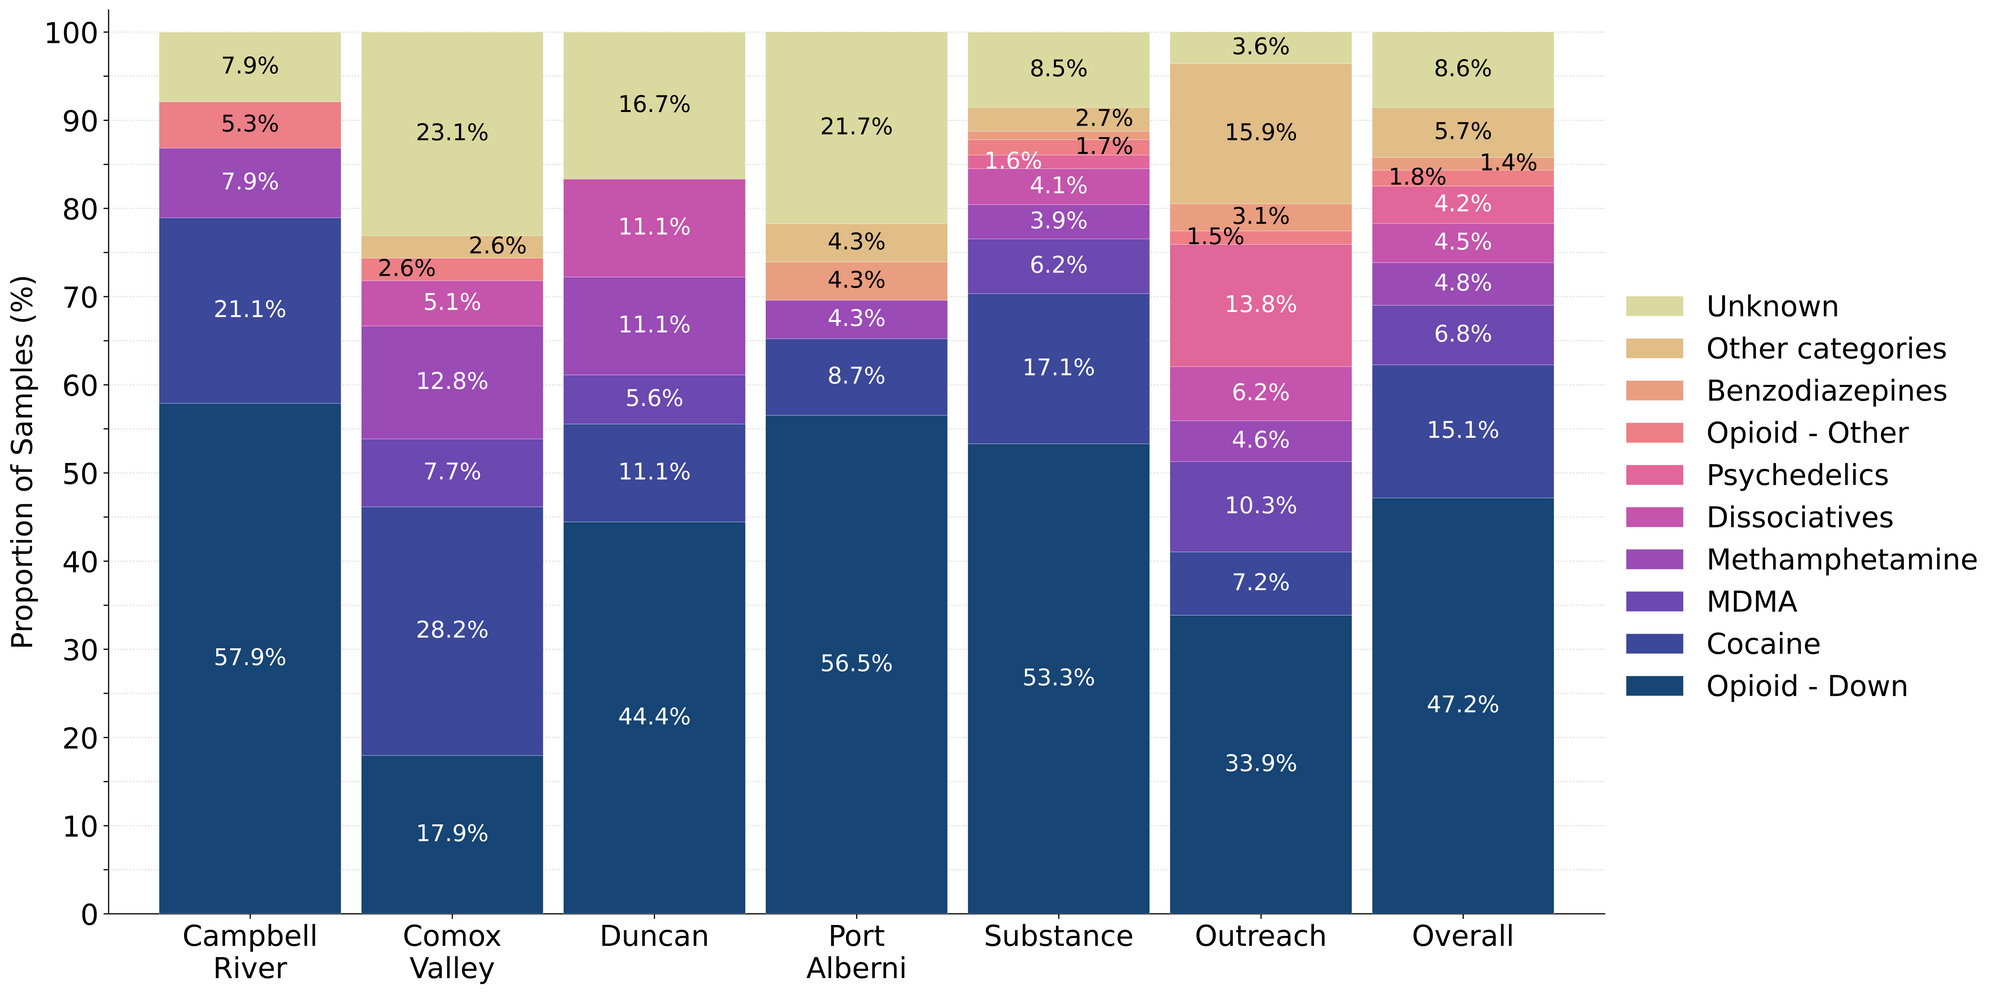 Figure 1. Prevalence of drug classes checked during November split by sample collection/method. Bars are stacked by the percentage of samples in each drug class, with the individual percentages overlaid. Drug classes which represent less than 1% of a given location’s total do not have their percent overlaid onto the bar.